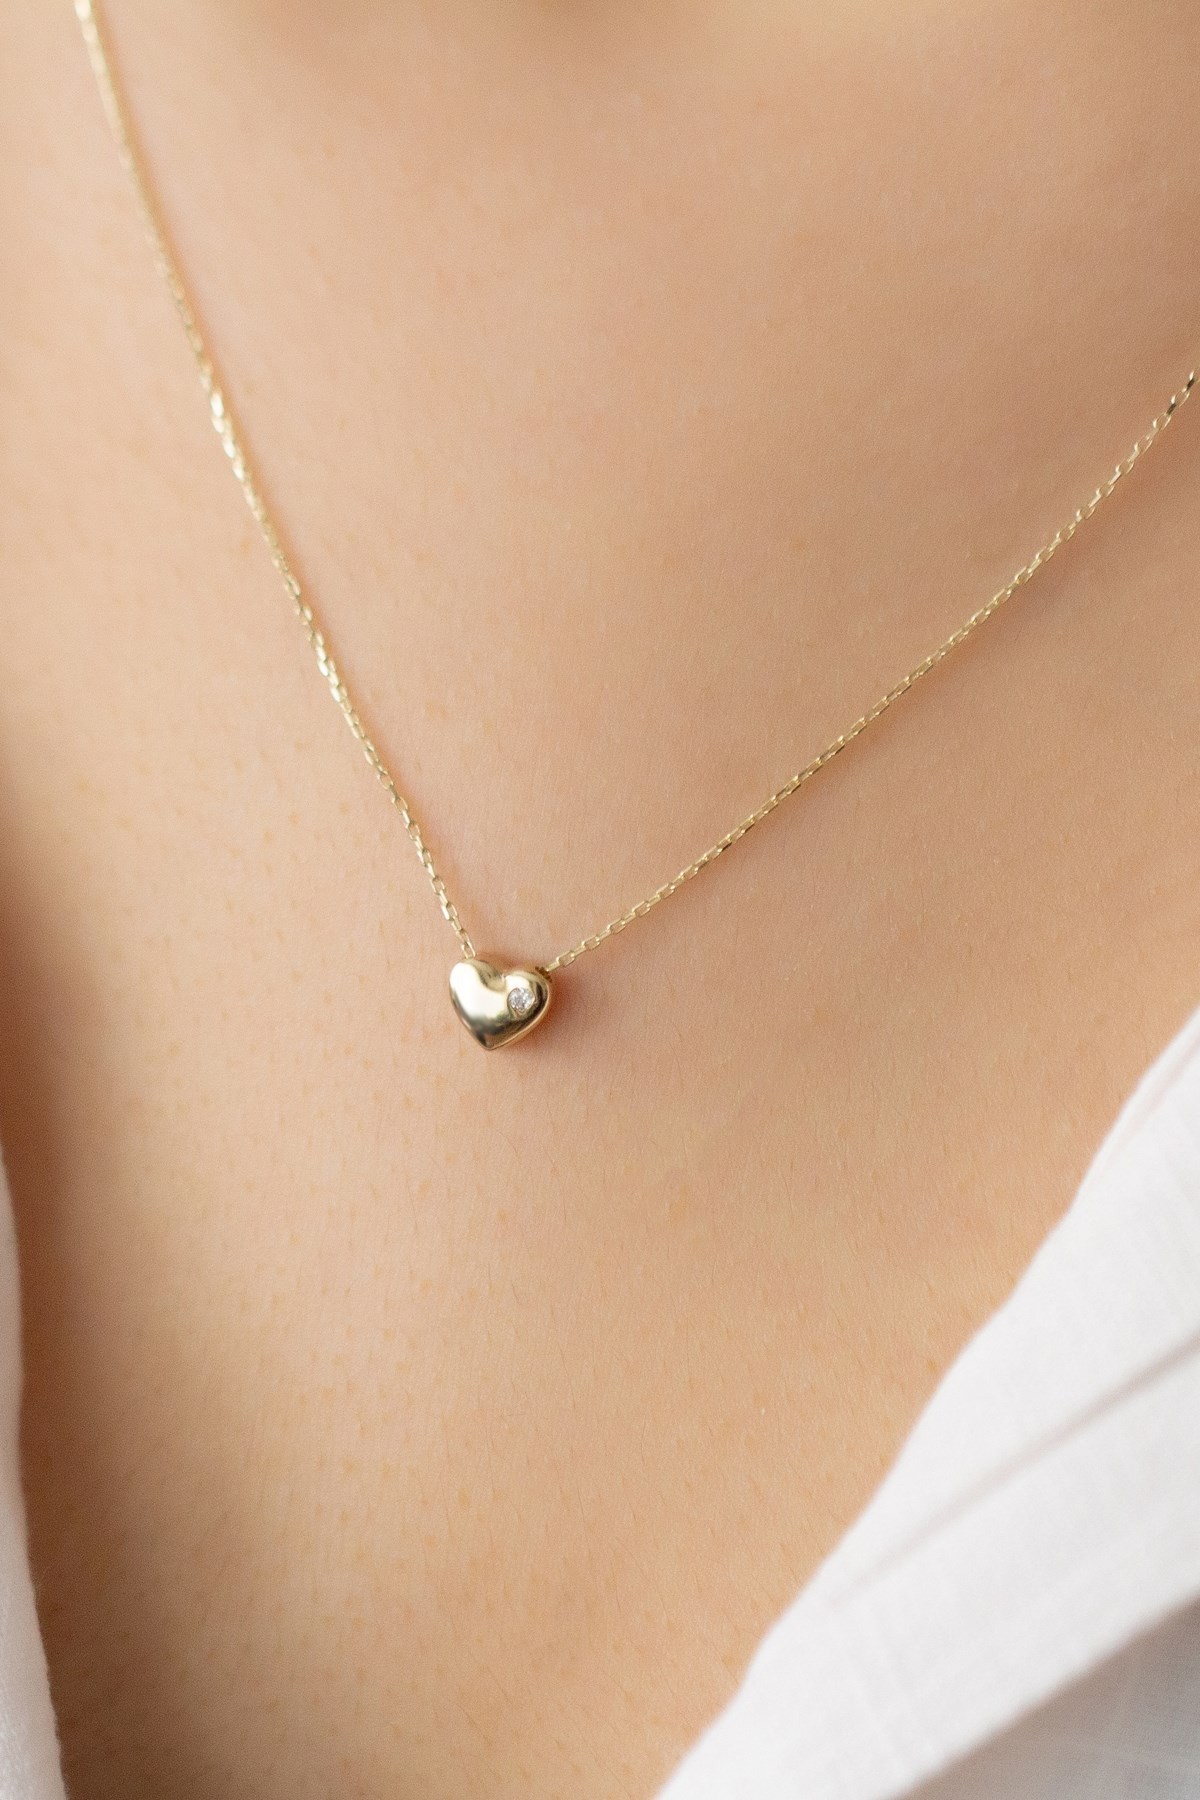 Minimal Gold Heart Necklace with Stone